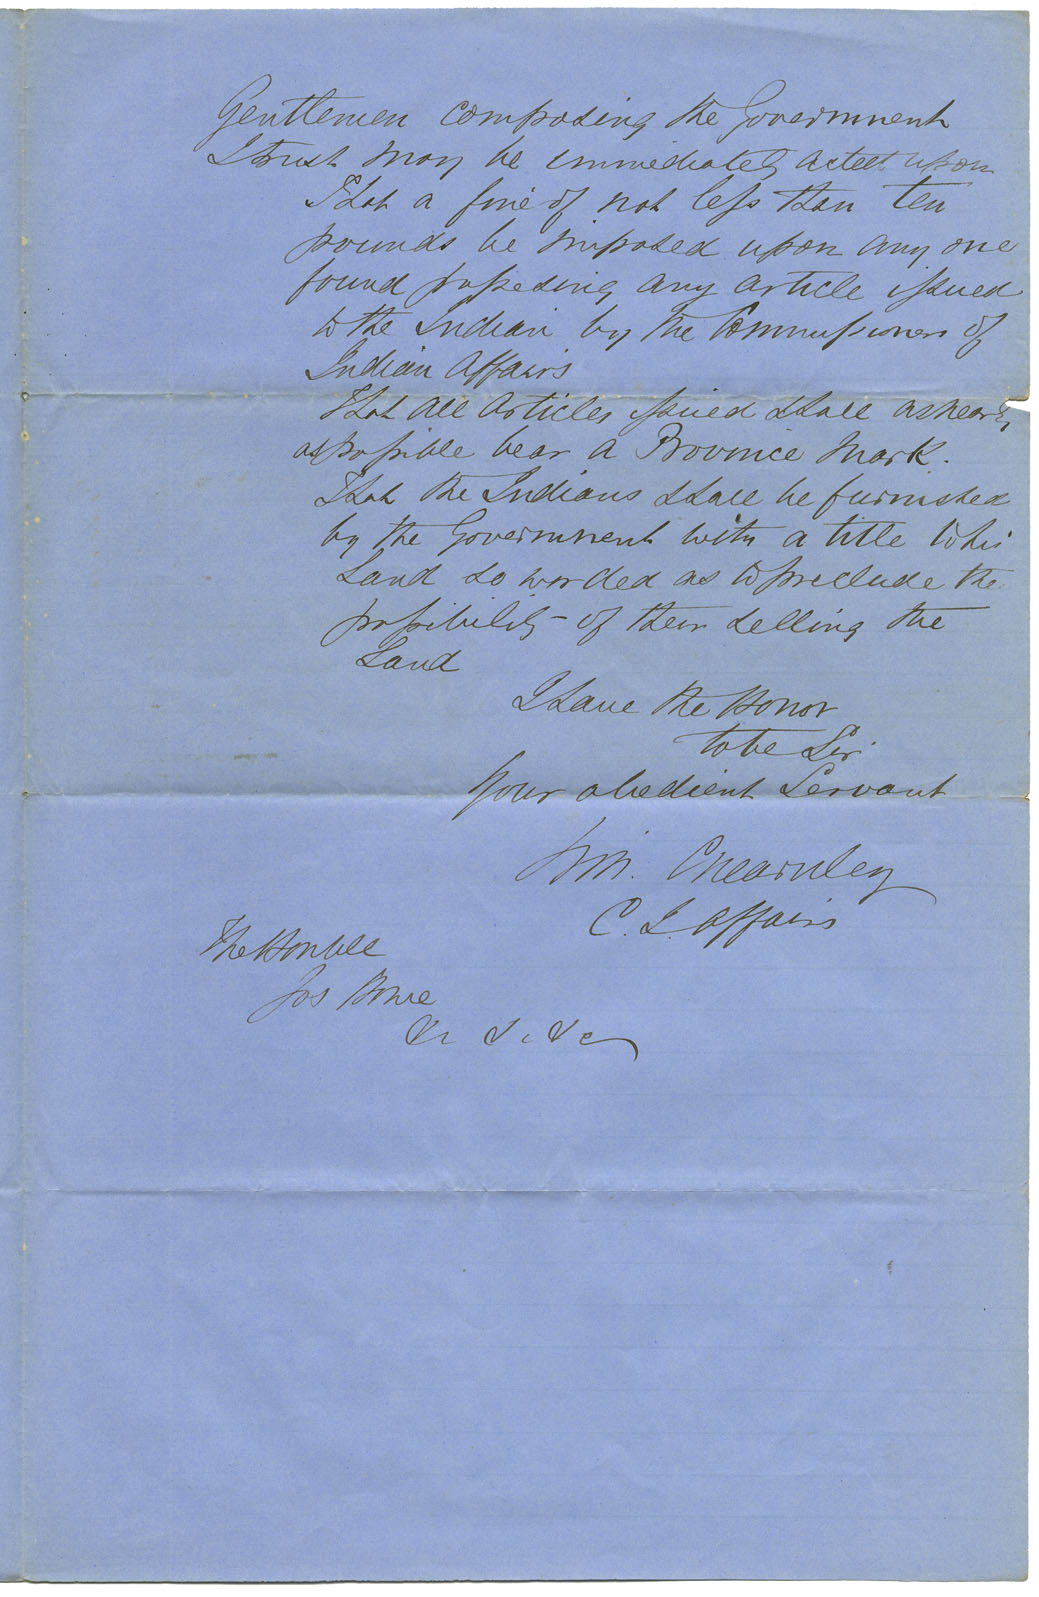 Report for 1853 of William Chearnley, Commissioner of Indian Affairs.